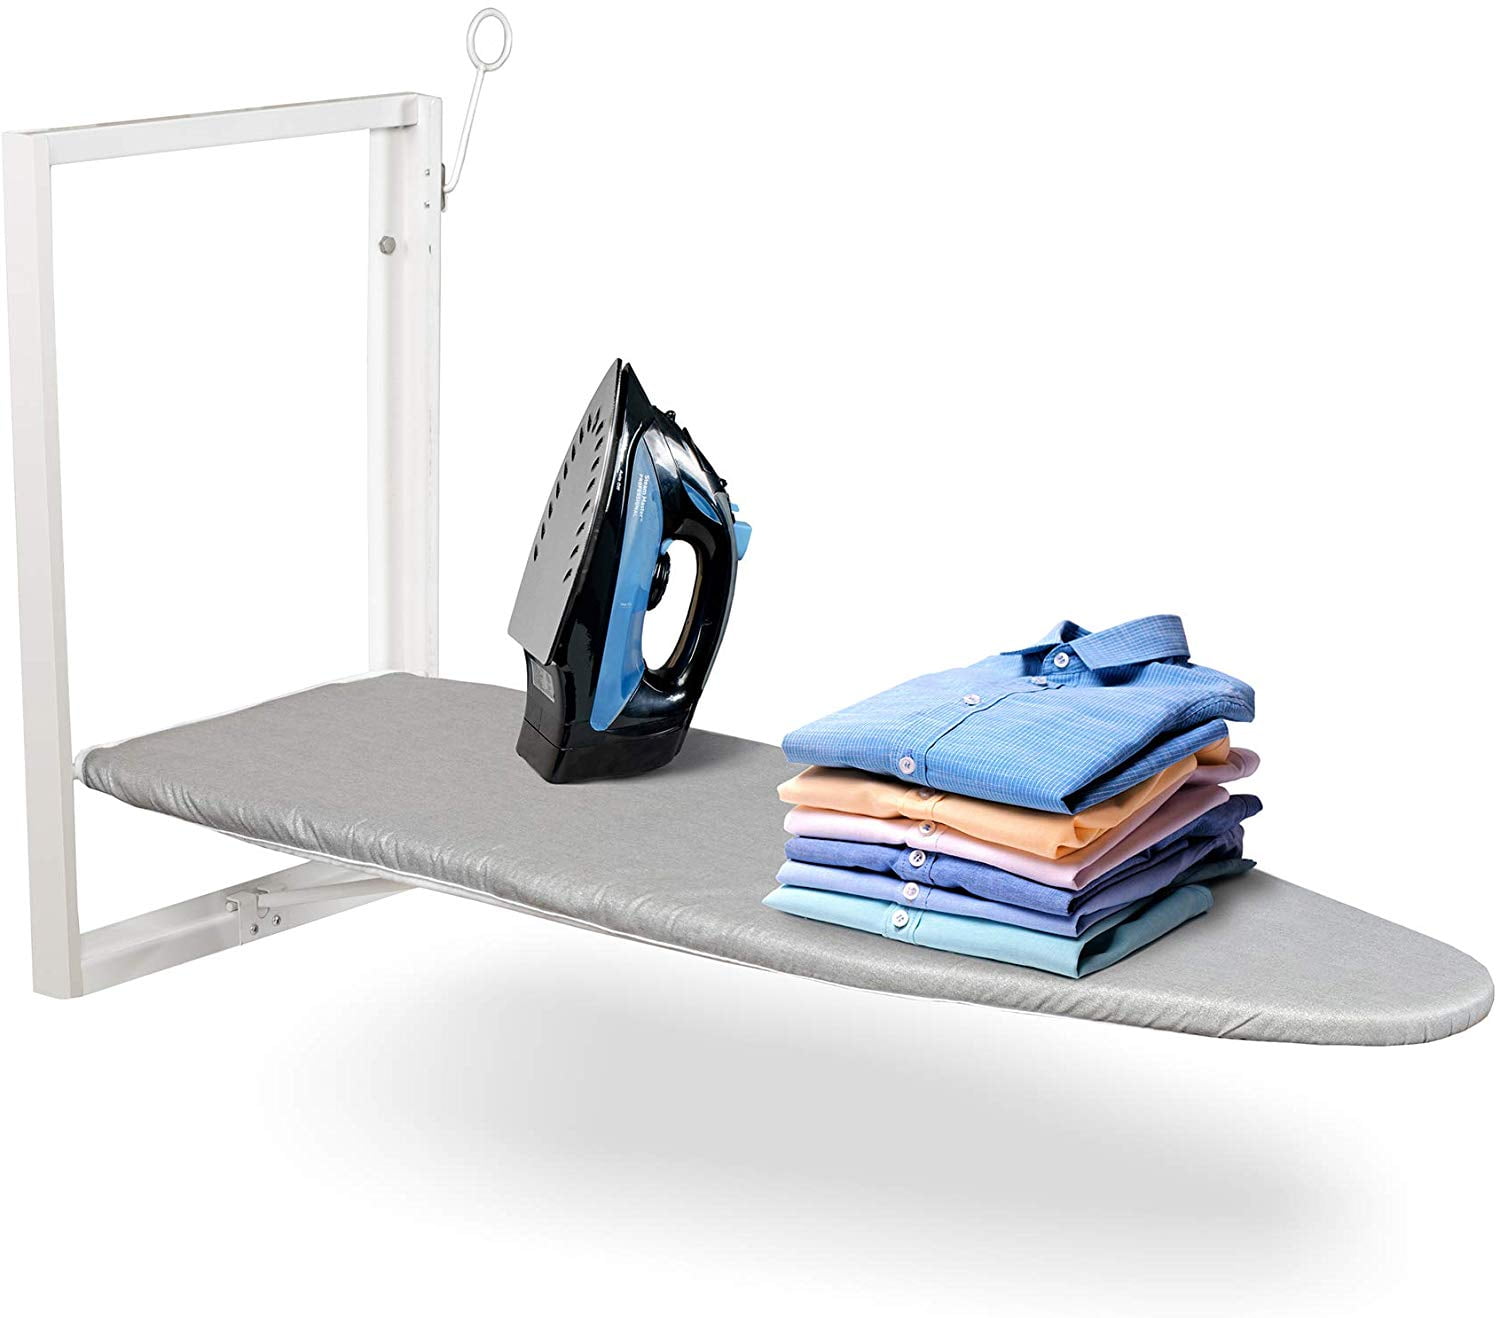 Details about  / Ironing Board Wall Mount Home Ironing Cover Folding Ironing Board Storage Iron